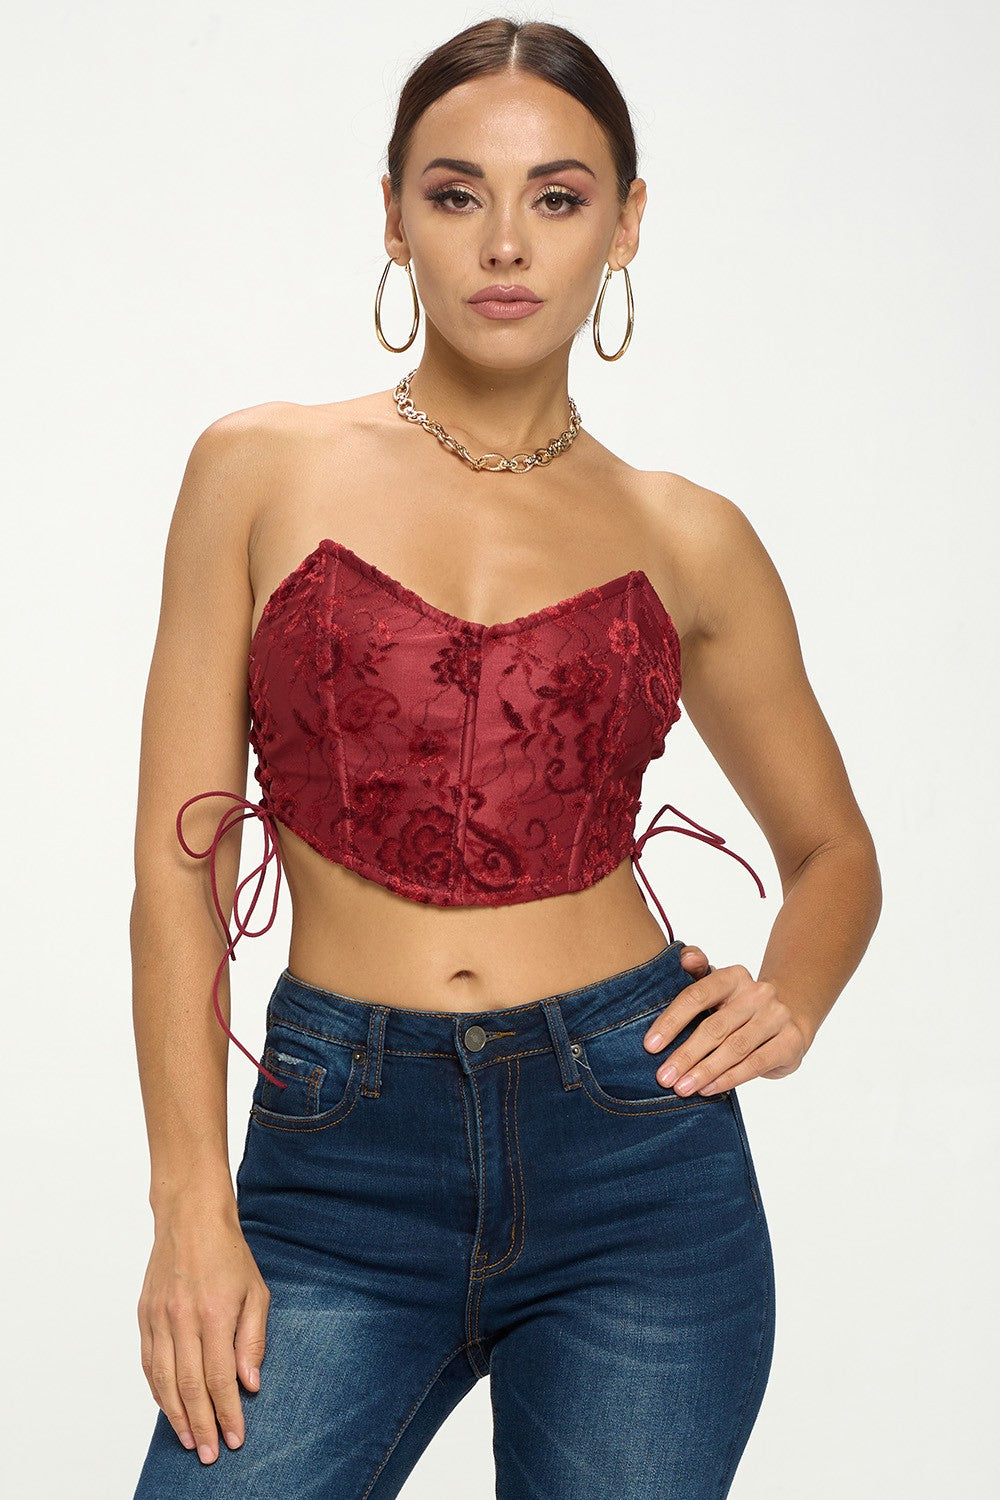 VELVET STRAPLESS SIDE LACE UP CORSET TOP